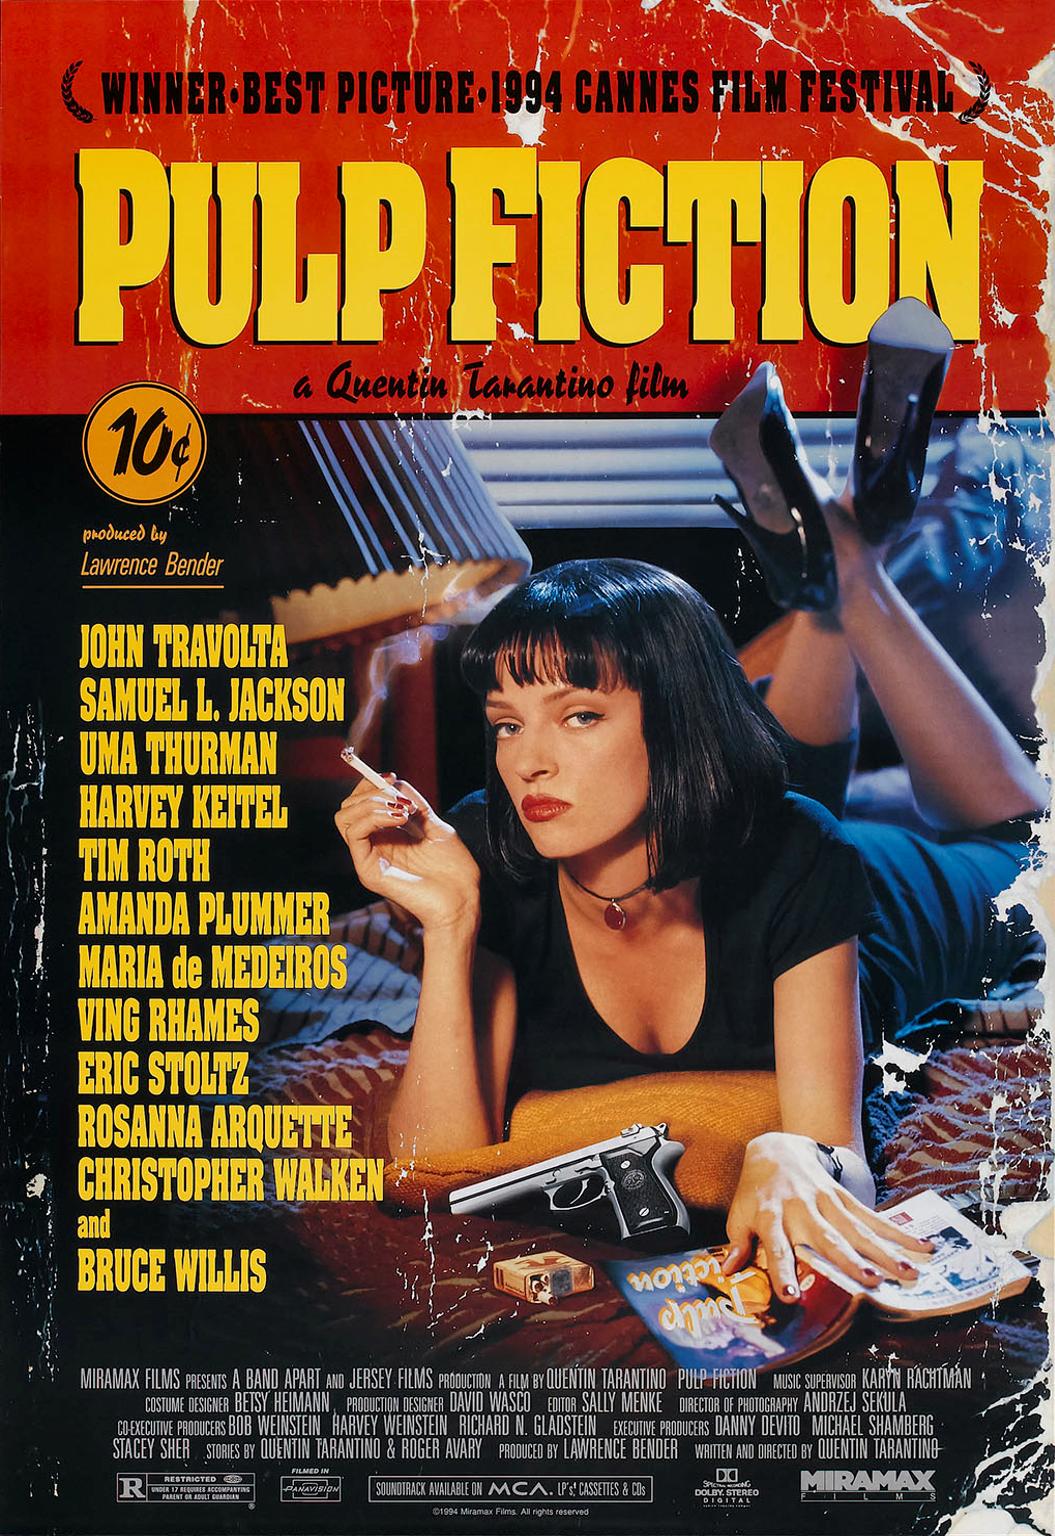 A movie poster for the 1990s film "Pulp Fiction"